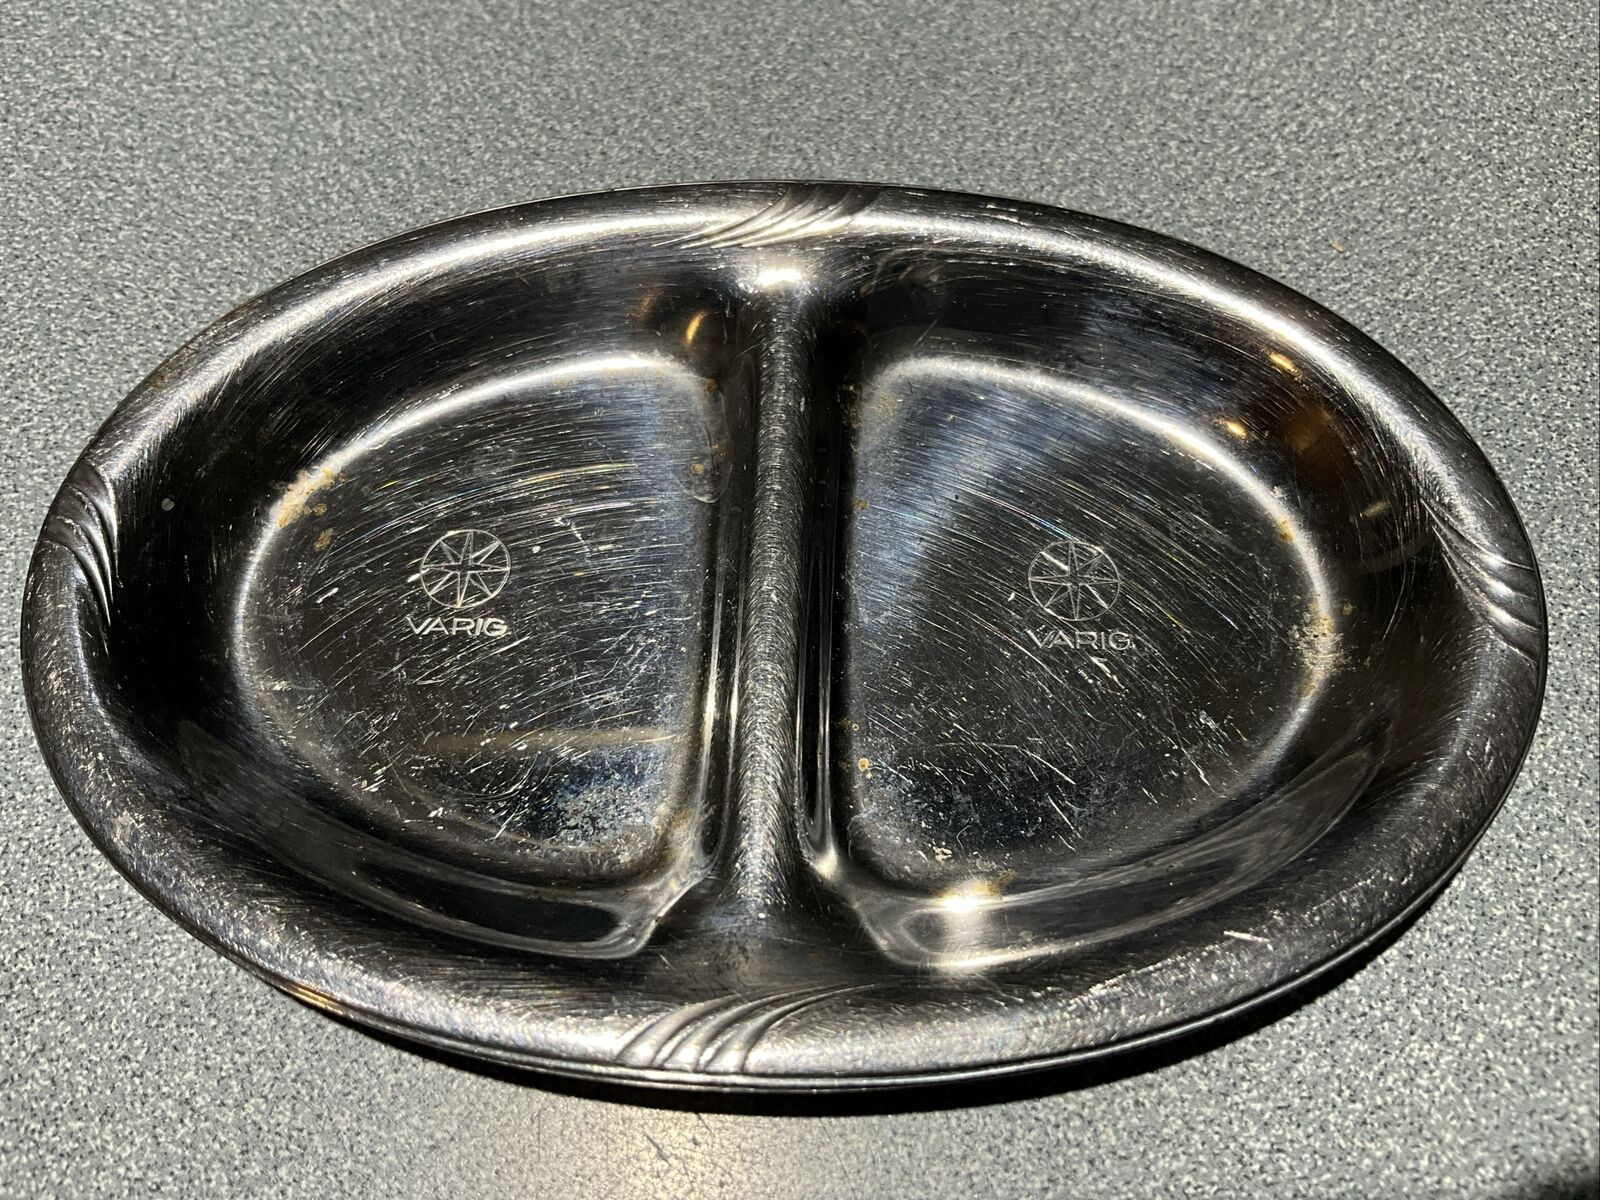 OLD  VARIG BRAZIL AIRLINE  STAINLESS STEEL BUTTER NUTS DISH HERCULES INOX